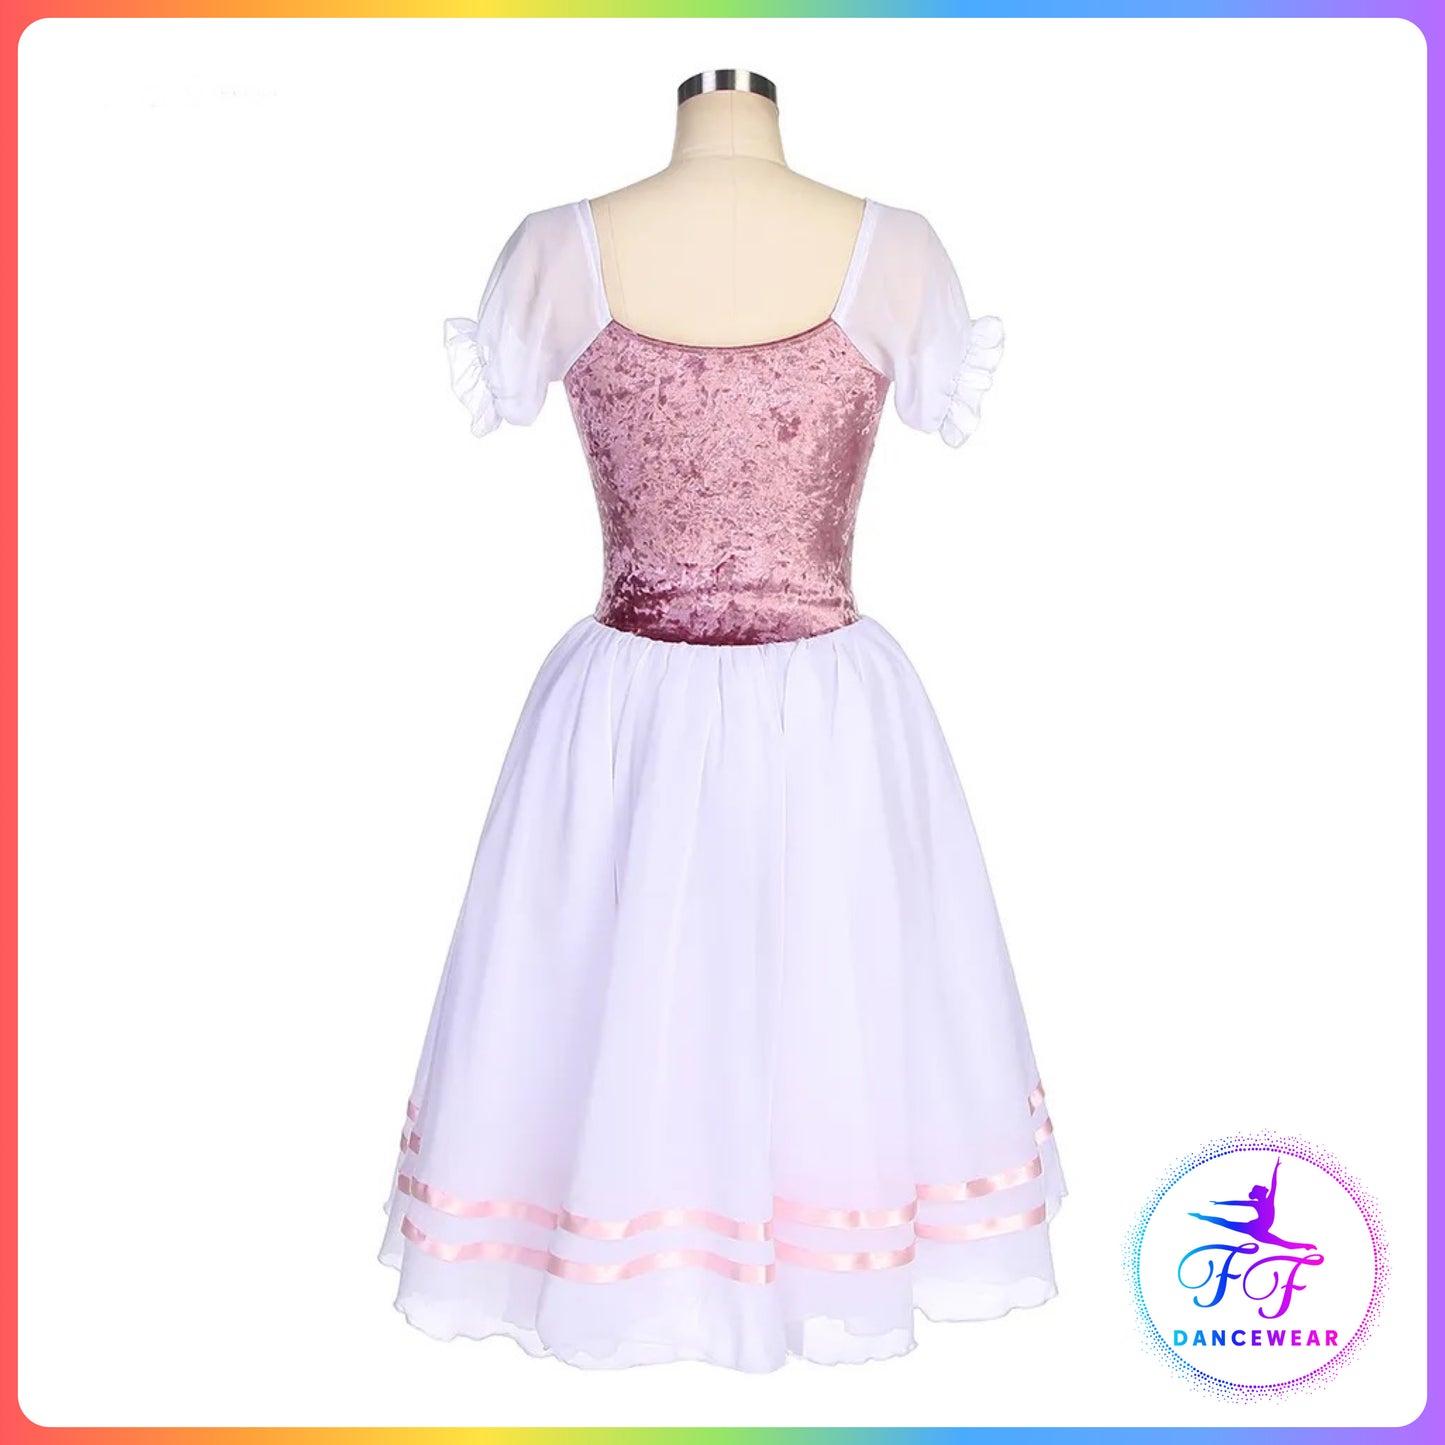 Pink & White Puff Sleeve Ballet Dress (Child & Adult Sizes)